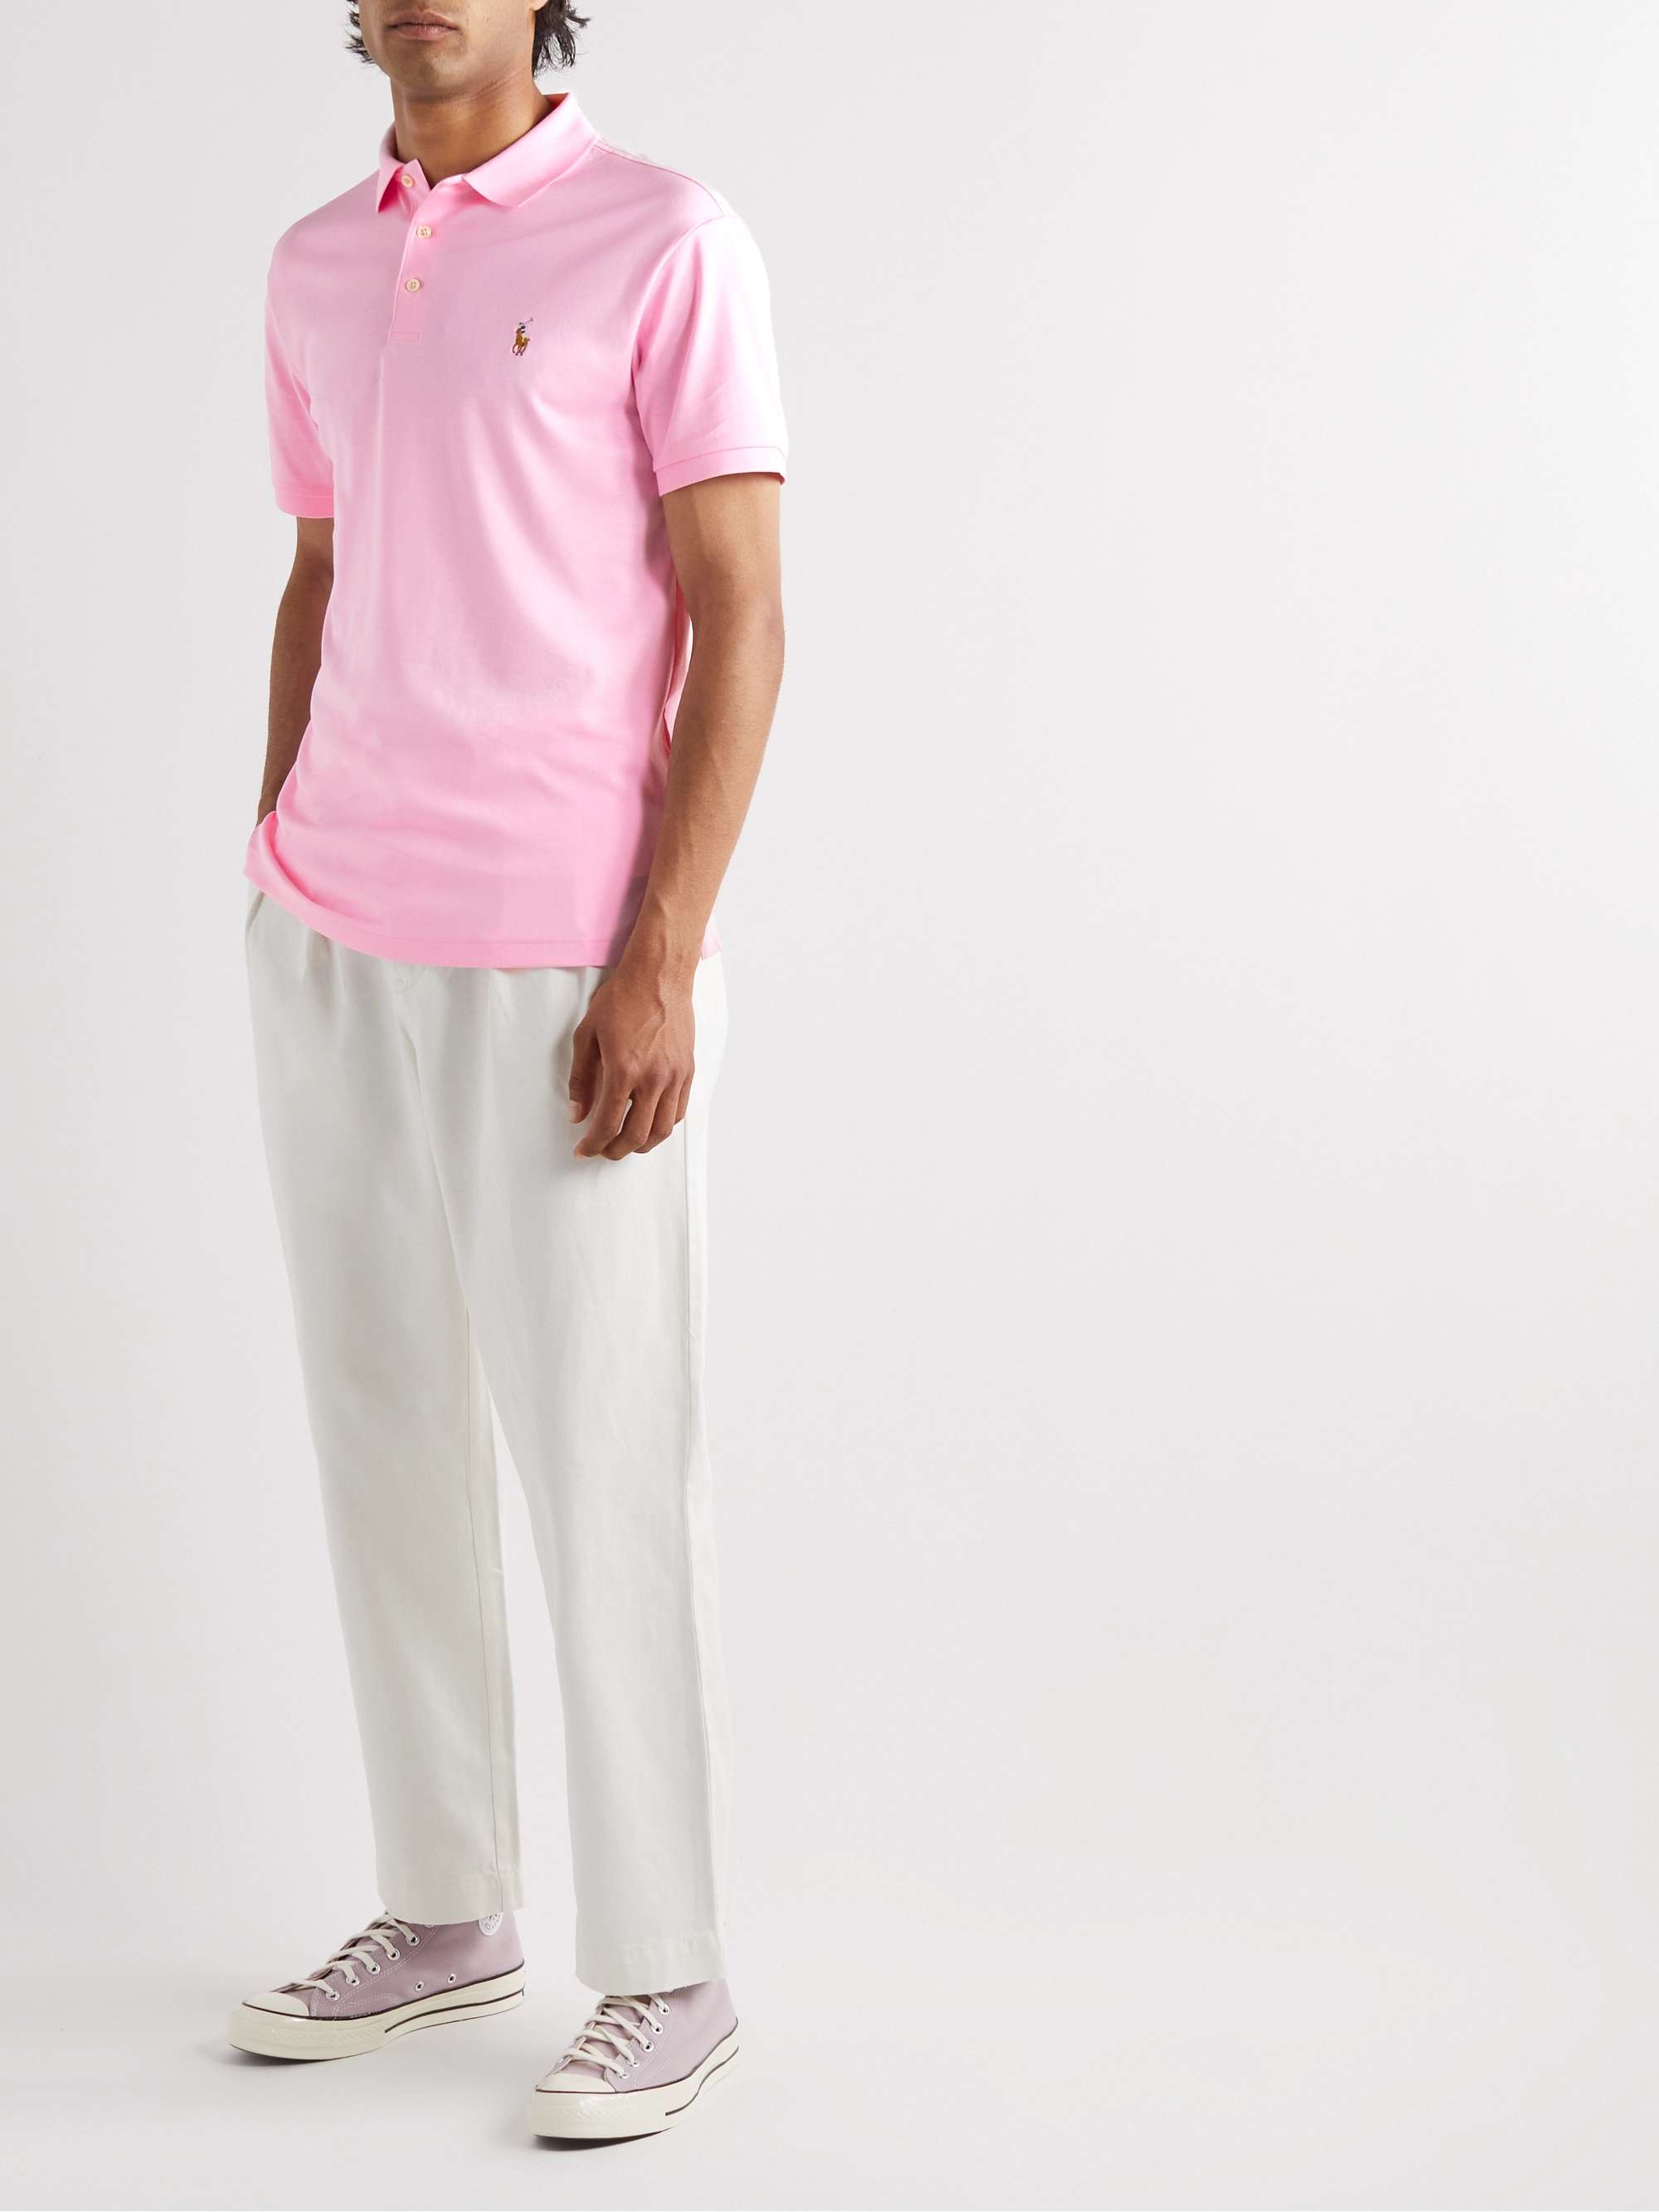 Polo Ralph Lauren Pima Soft-touch Shirt in Pink for Men